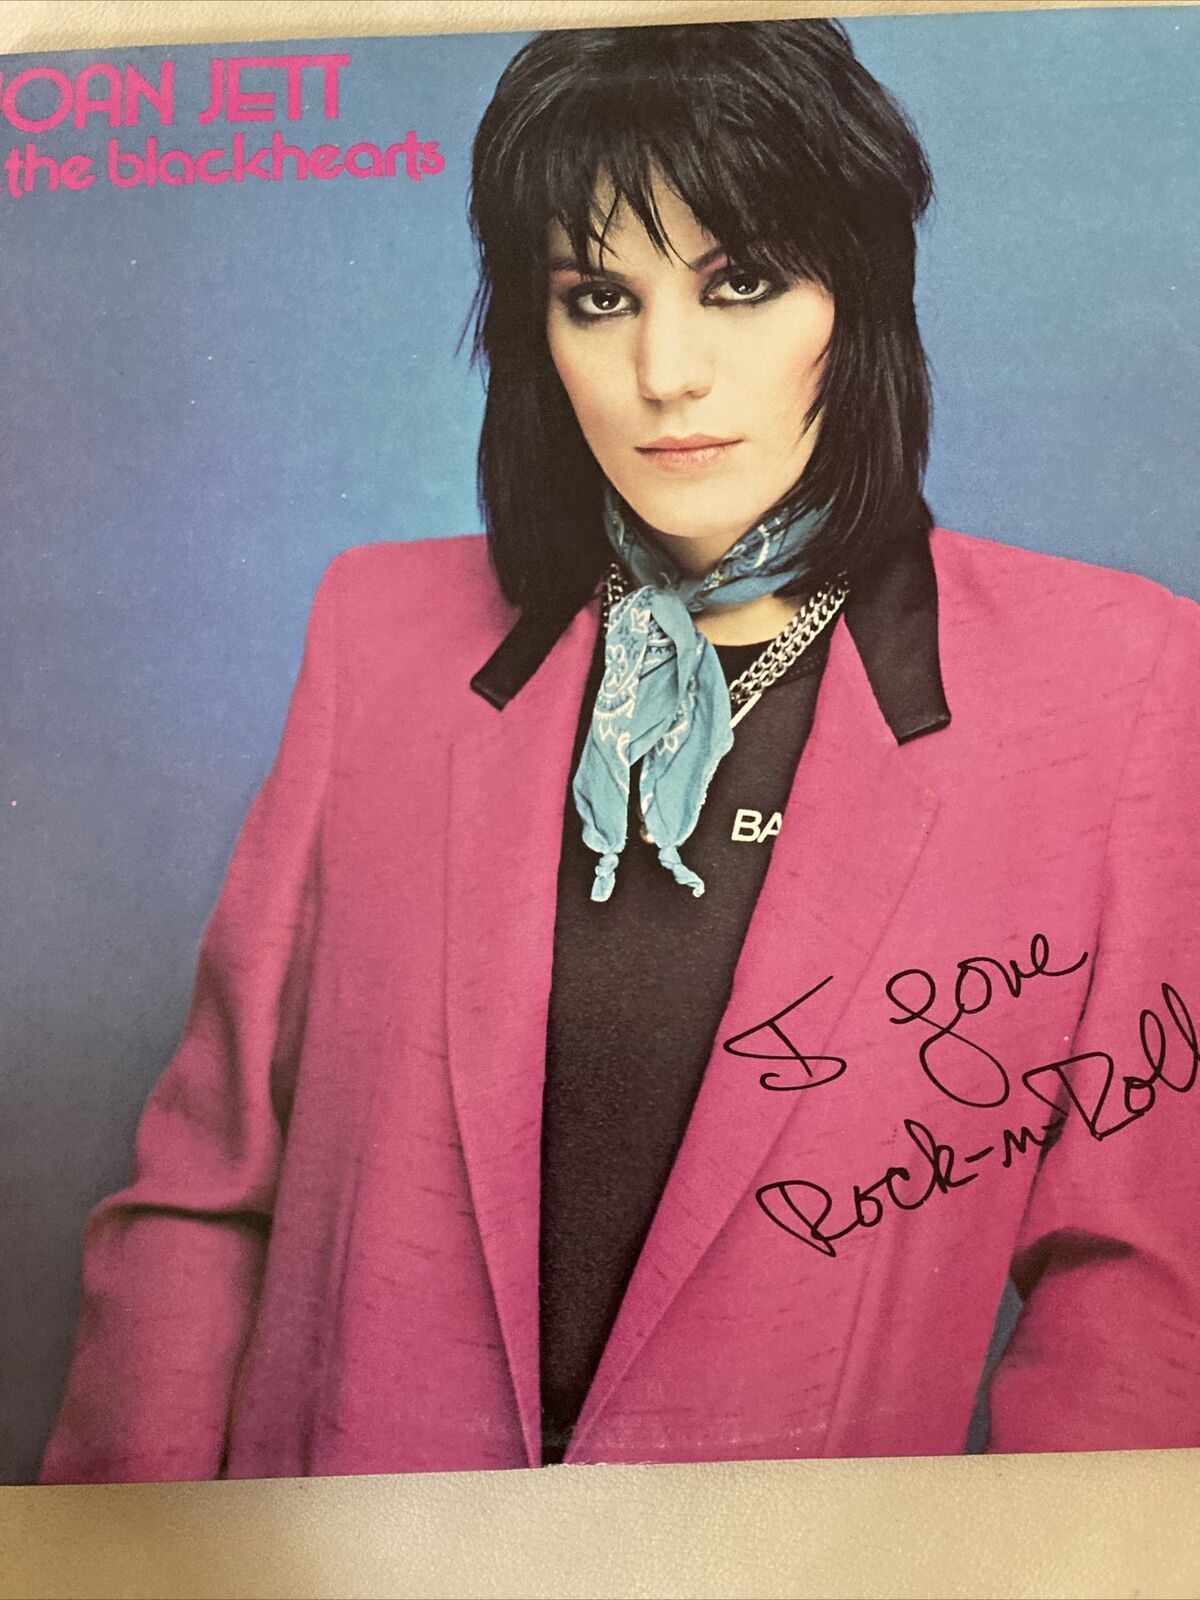 I Love Rock ‘n Roll By Joan Jett And The Blackhearts (record, 1981)